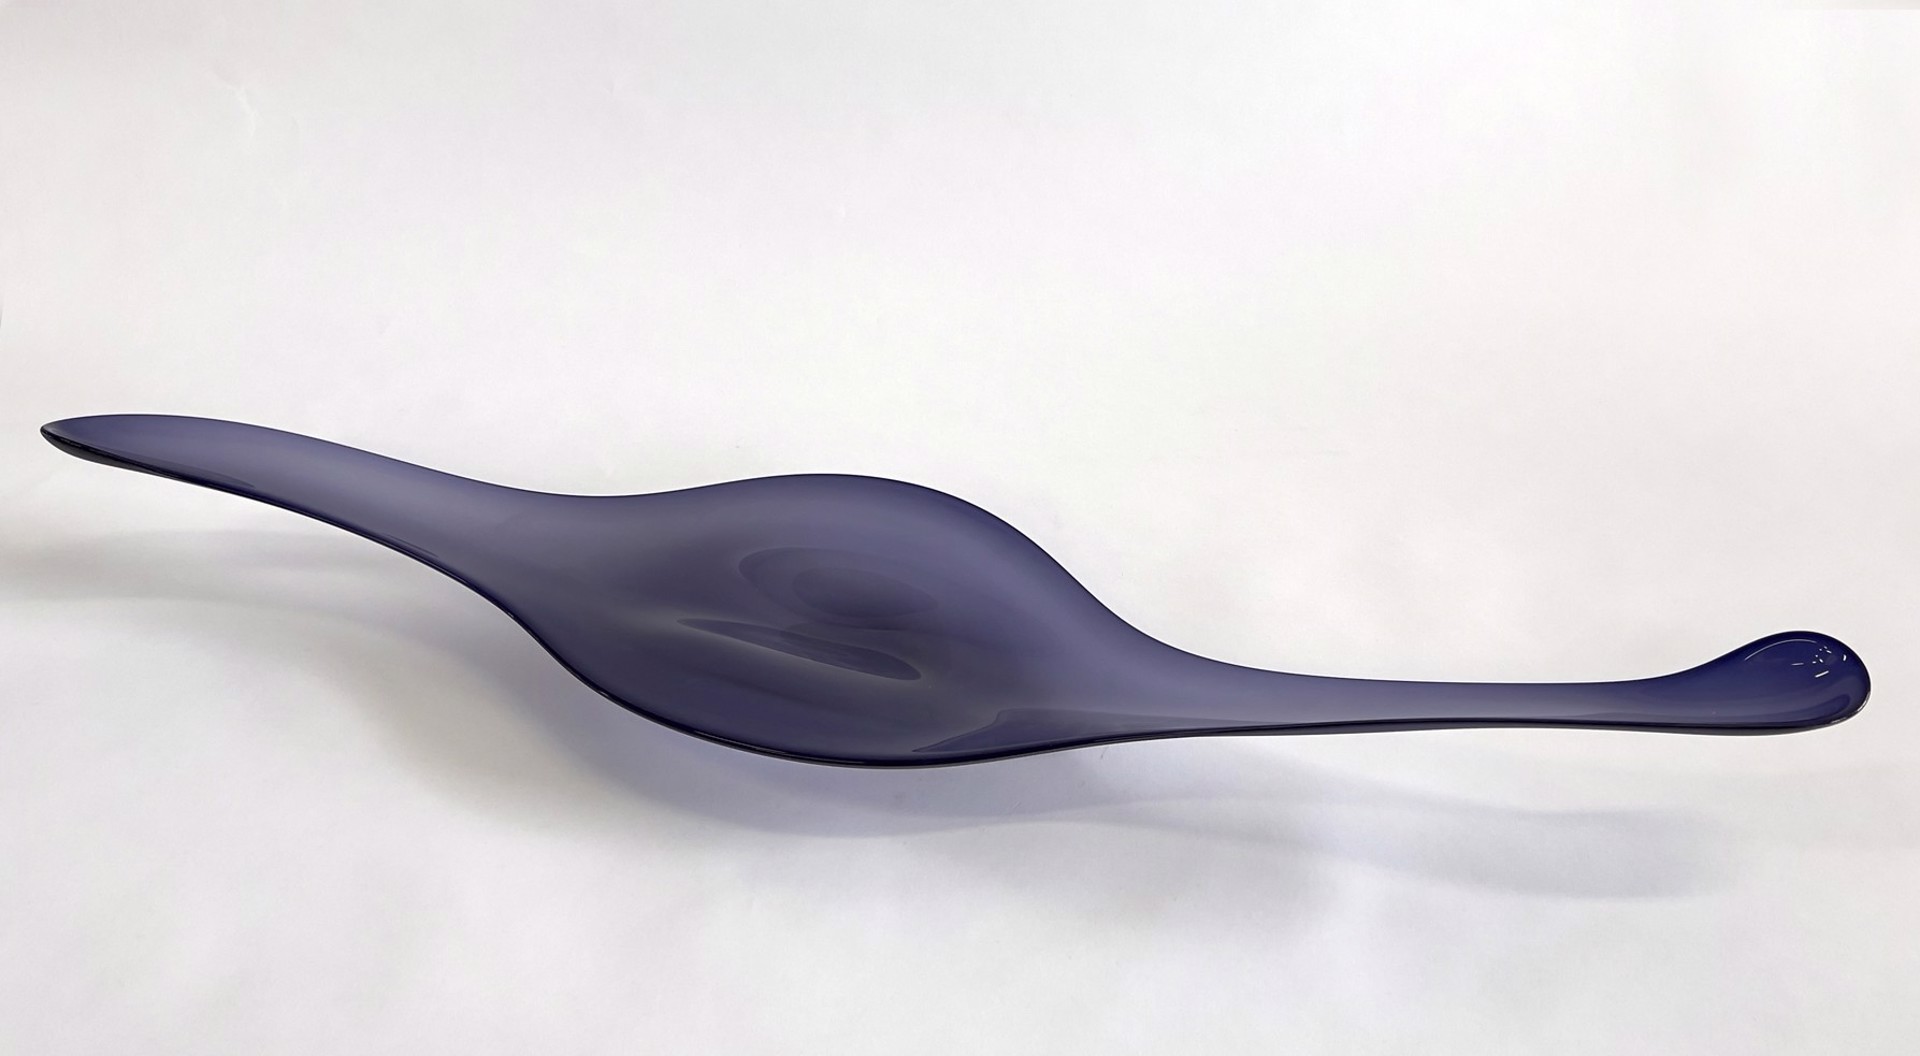 Midnight Camber by The Goodman Studio is a deep purple elongated abstract form. Perfect for a table. 